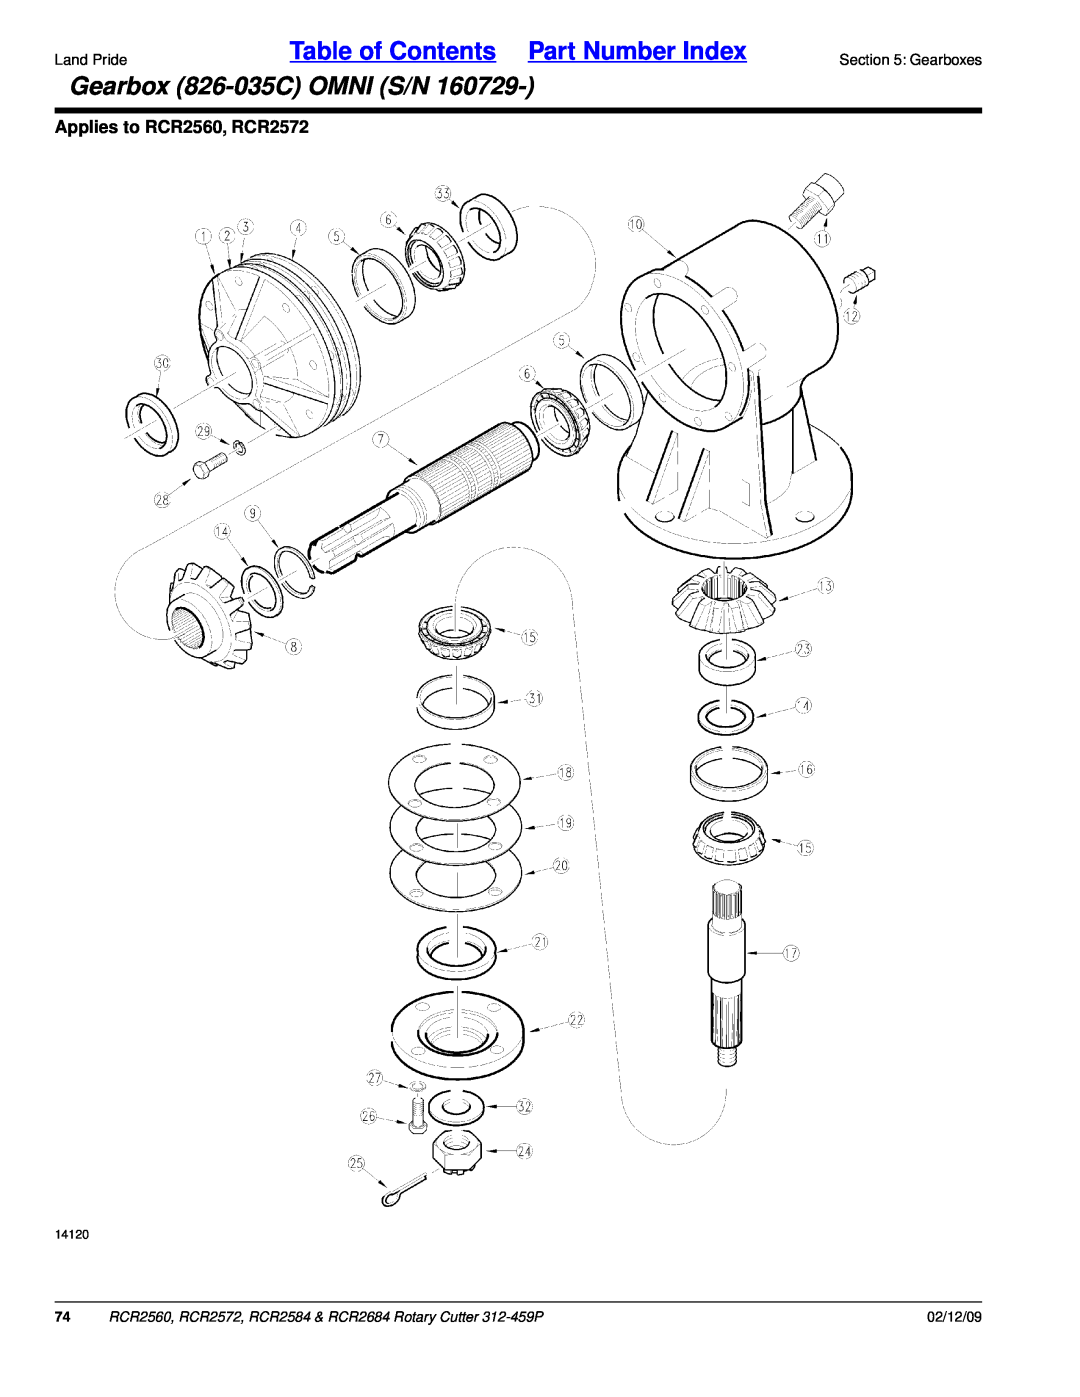 Land Pride manual Gearbox 826-035COMNI S/N, Table of Contents Part Number Index, Applies to RCR2560, RCR2572, 02/12/09 